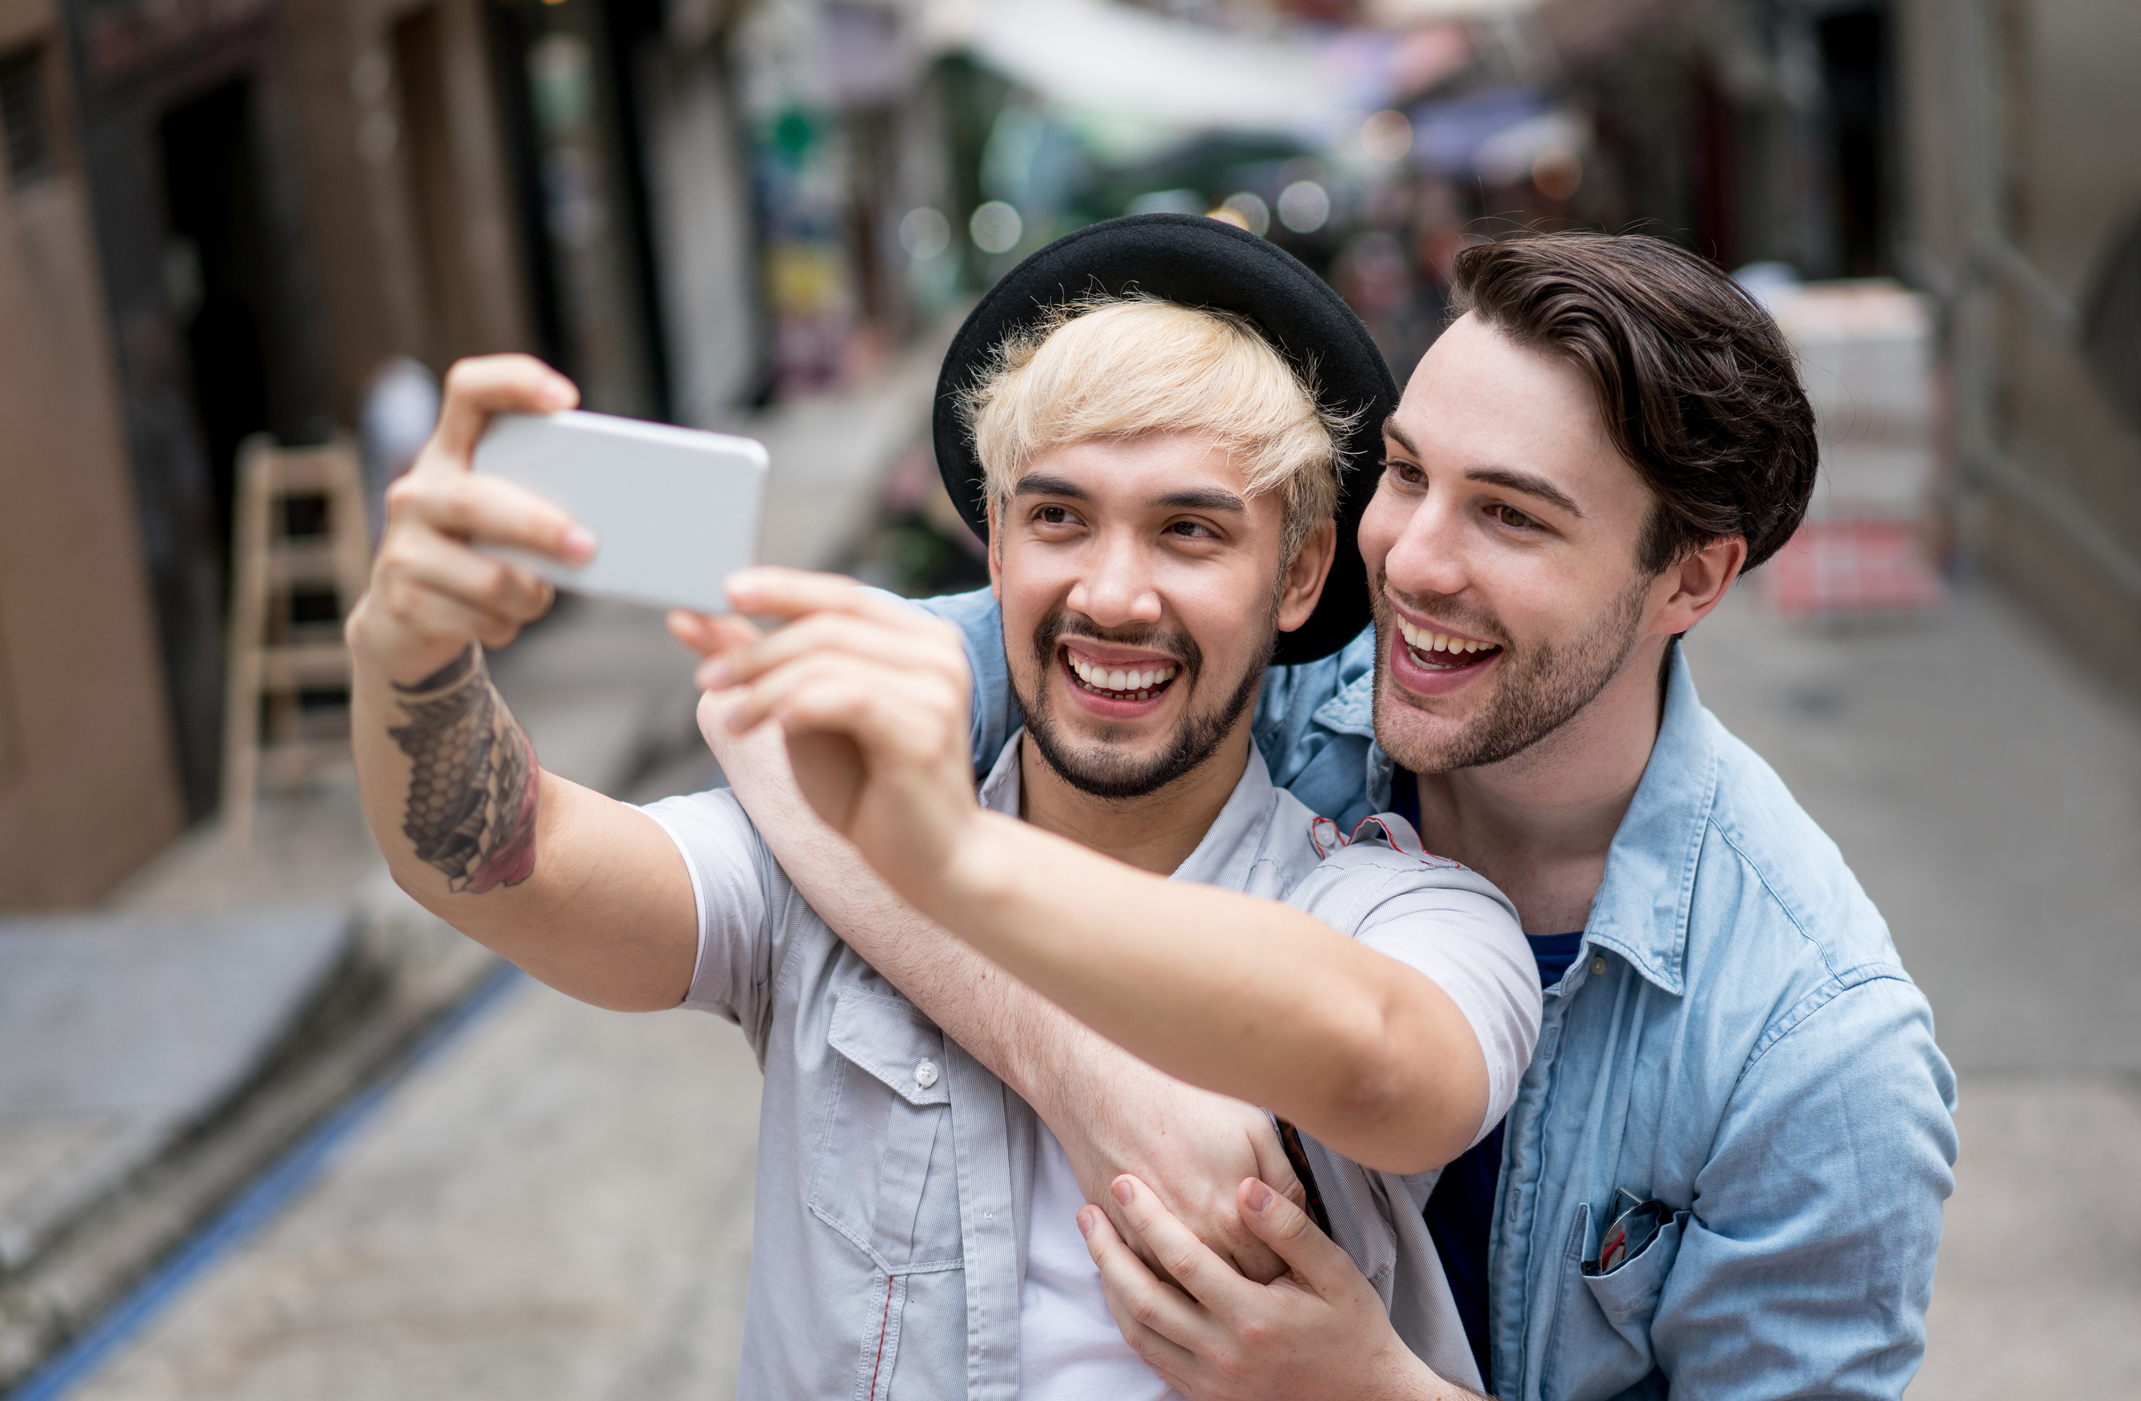 Homosexual couple using smart phone generation y, young adult